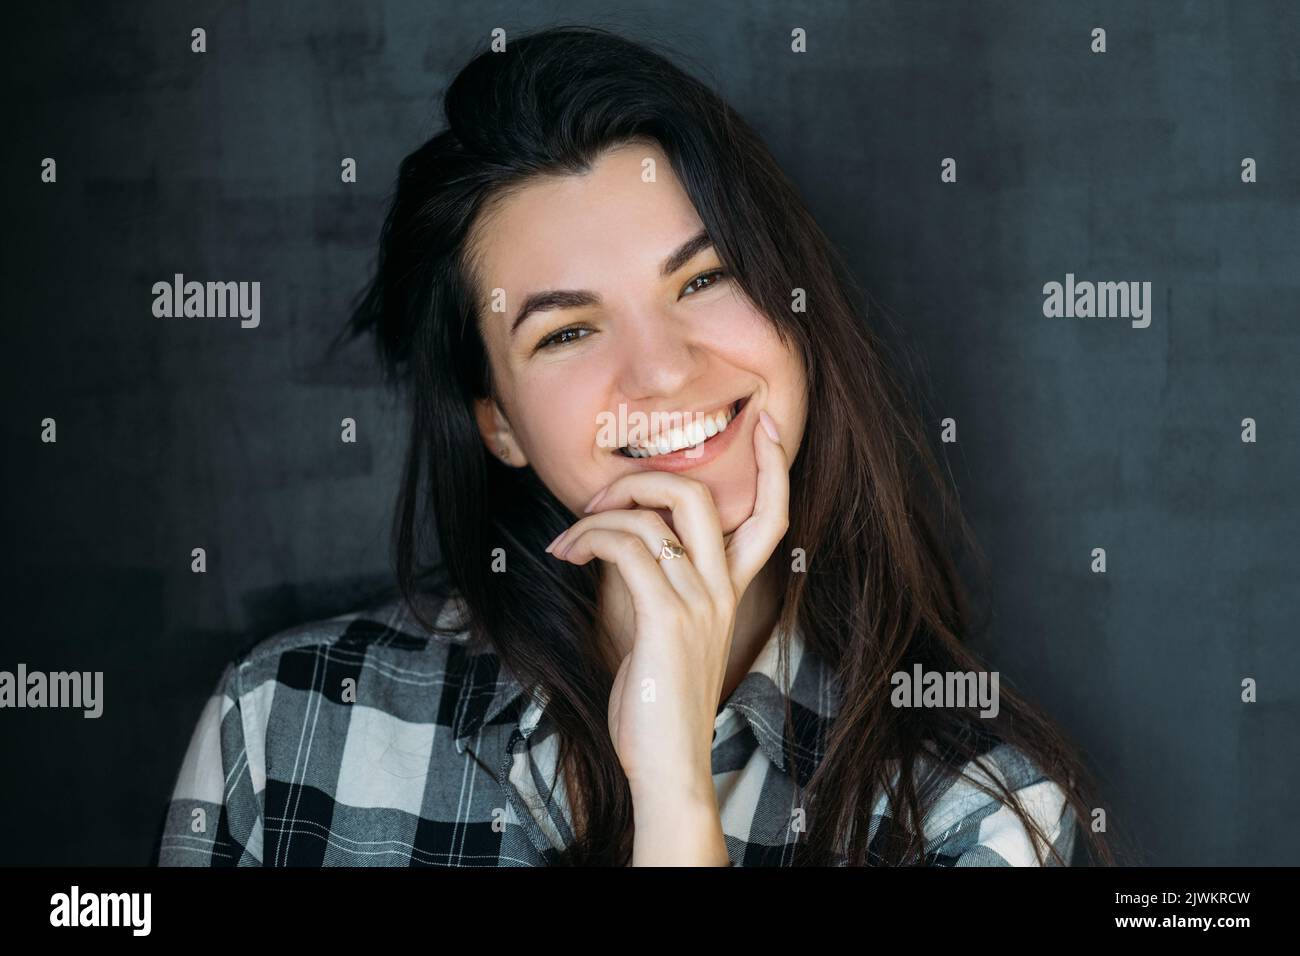 cheerful young brunette smiling inquisitive lady Stock Photo